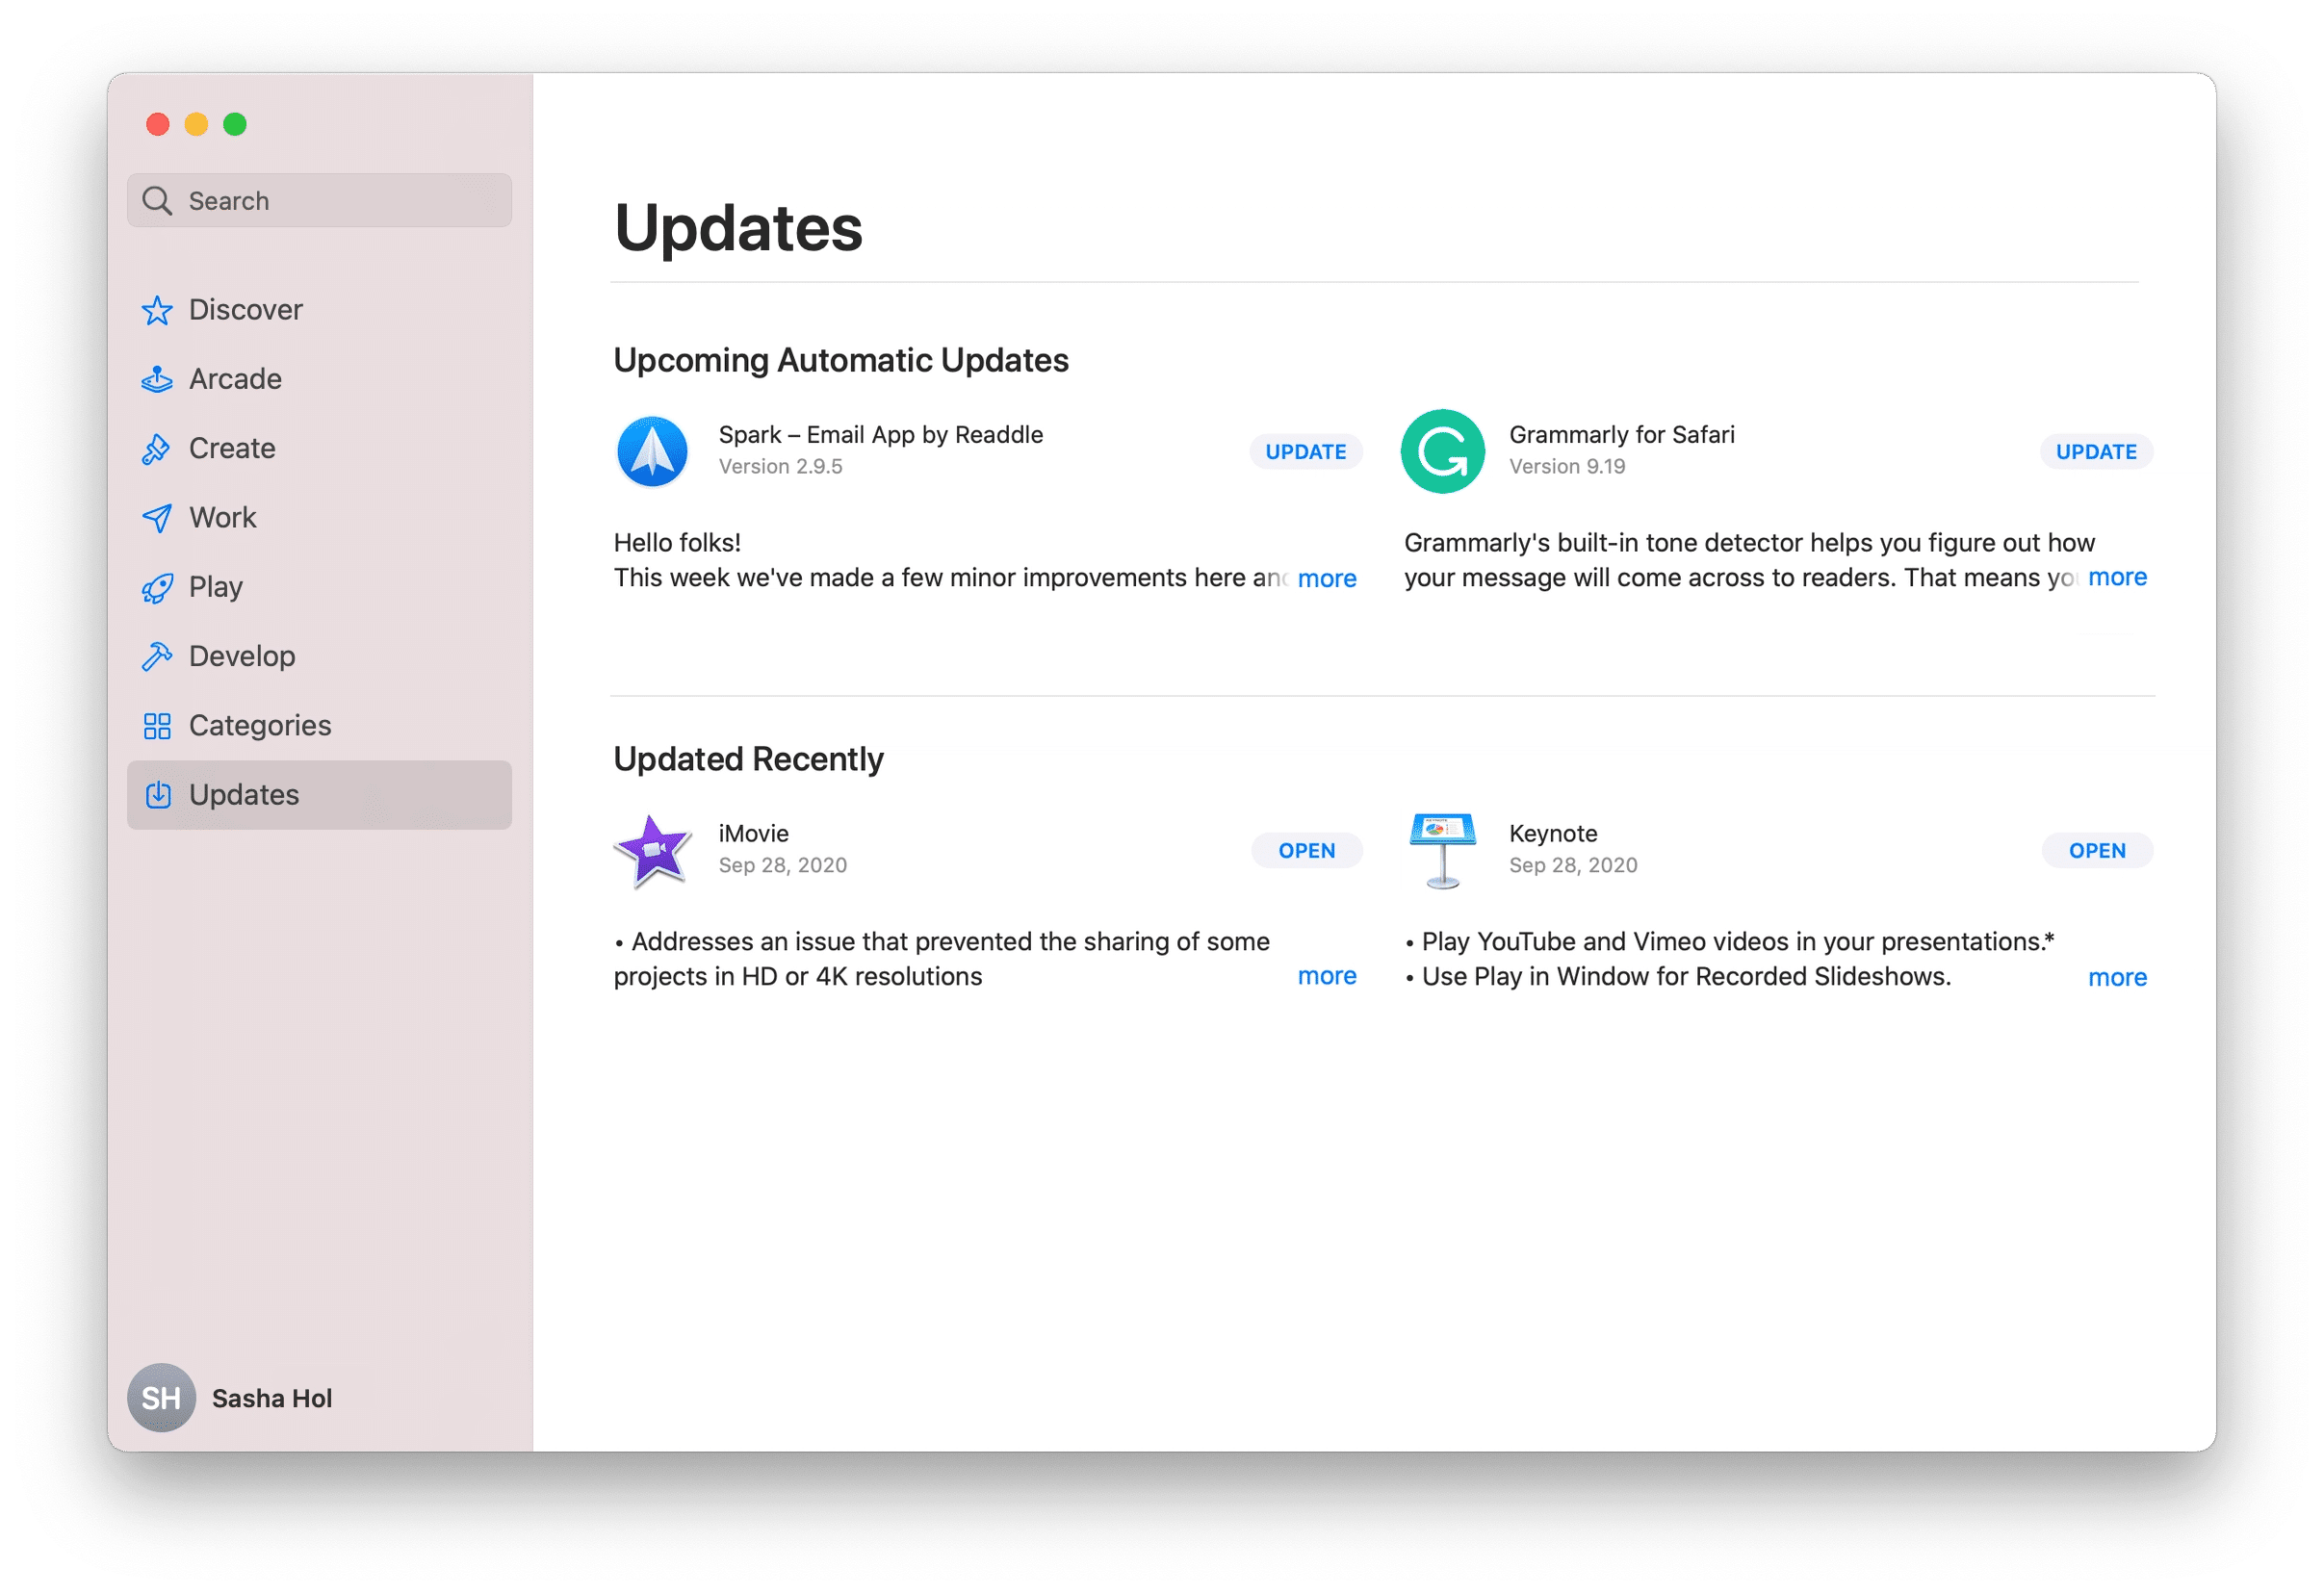 App Store window showing Updates section for apps